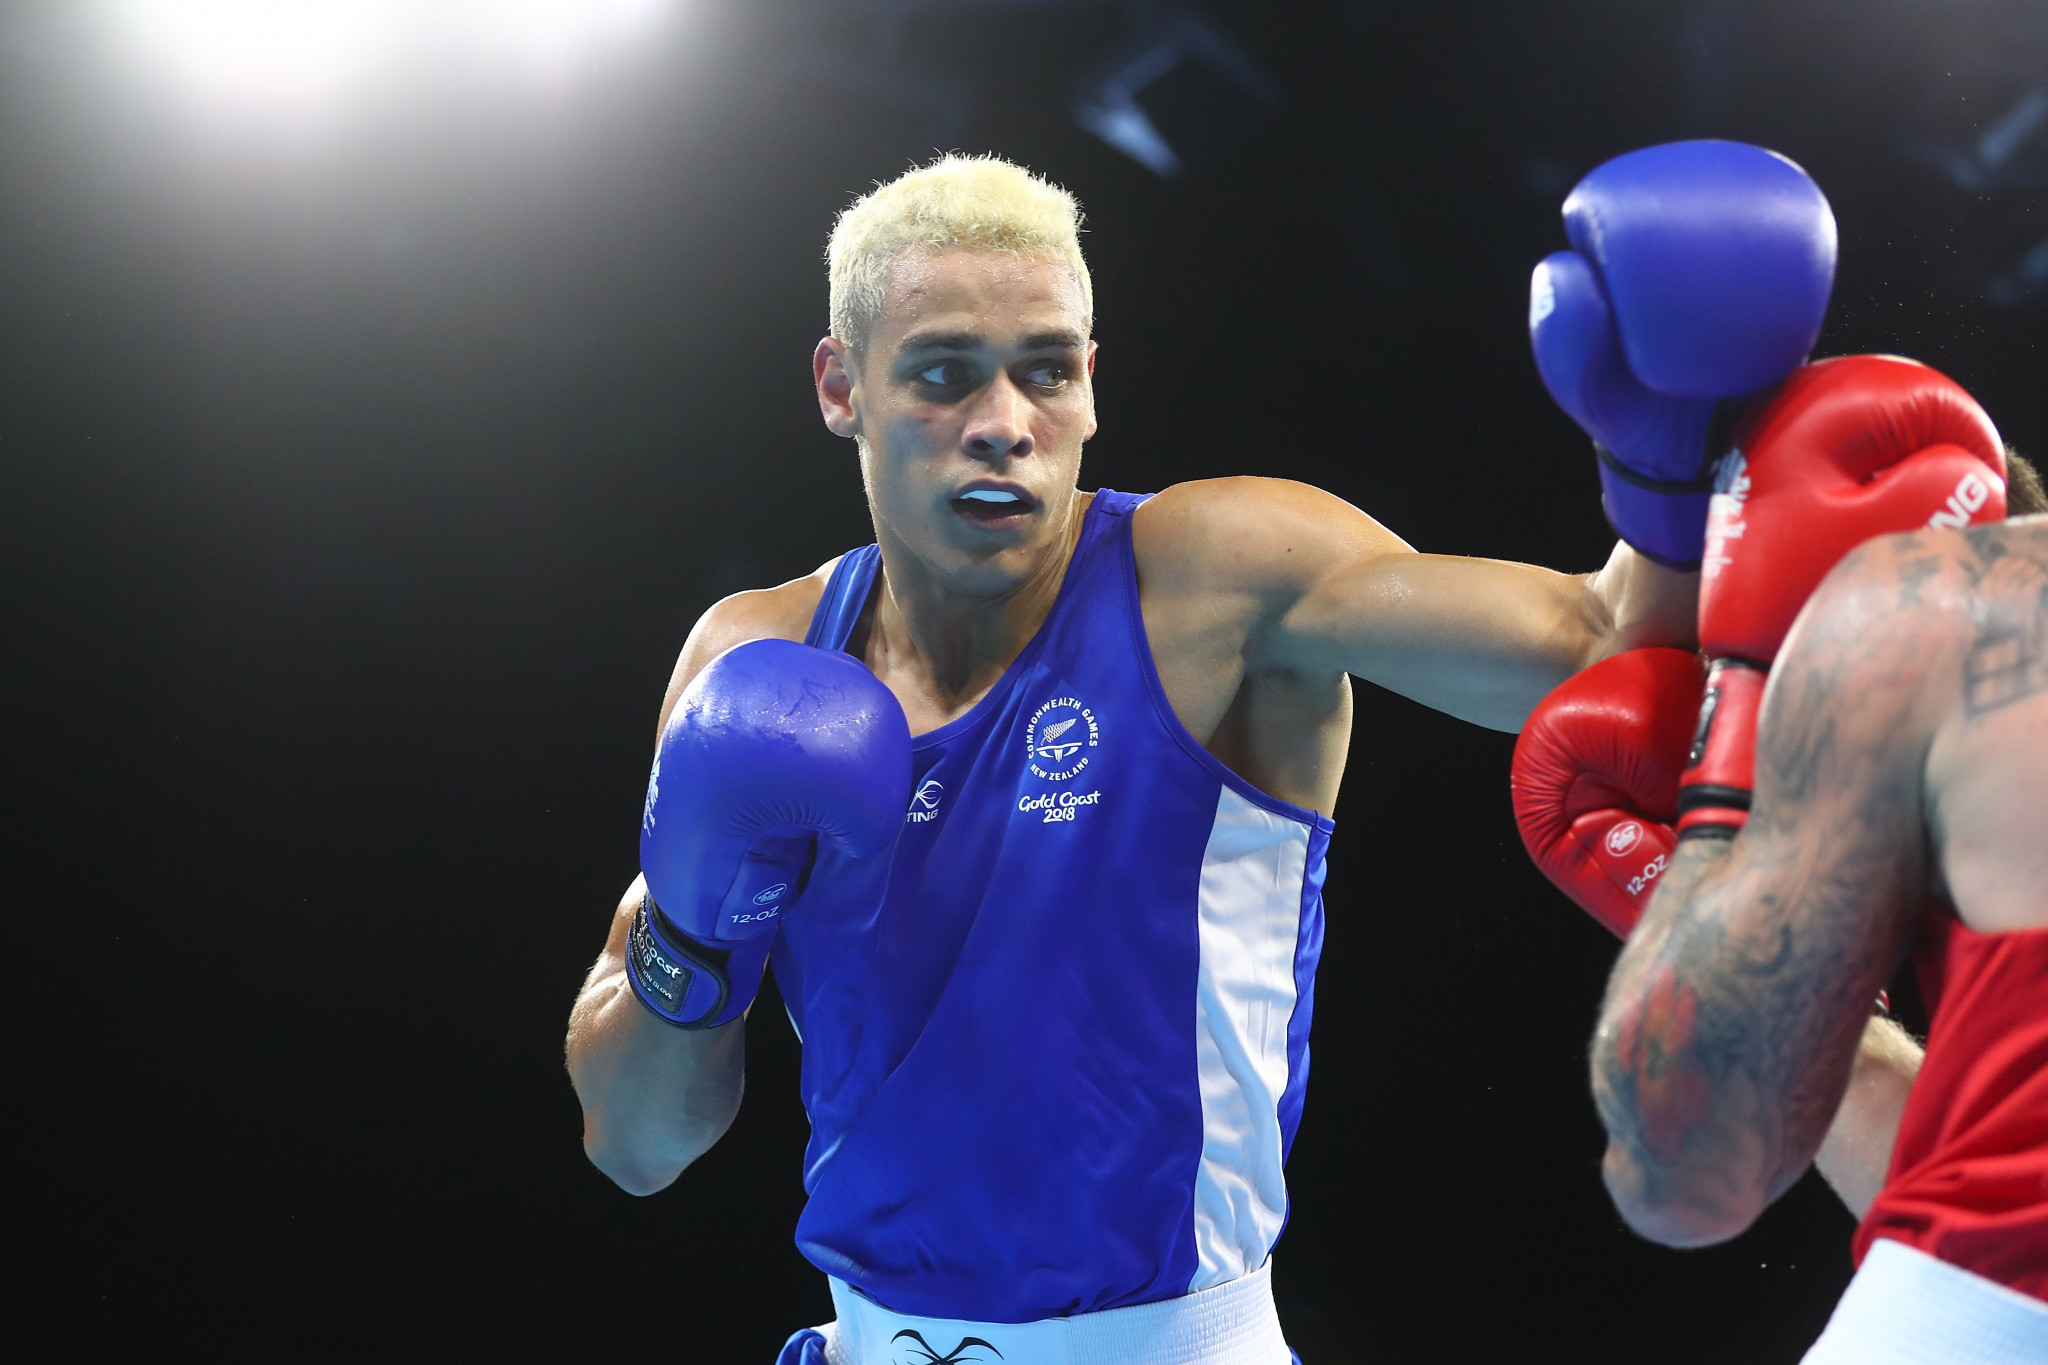 David Nyika moved up from light heavyweight to heavyweight for Gold Coast 2018 ©Getty Images